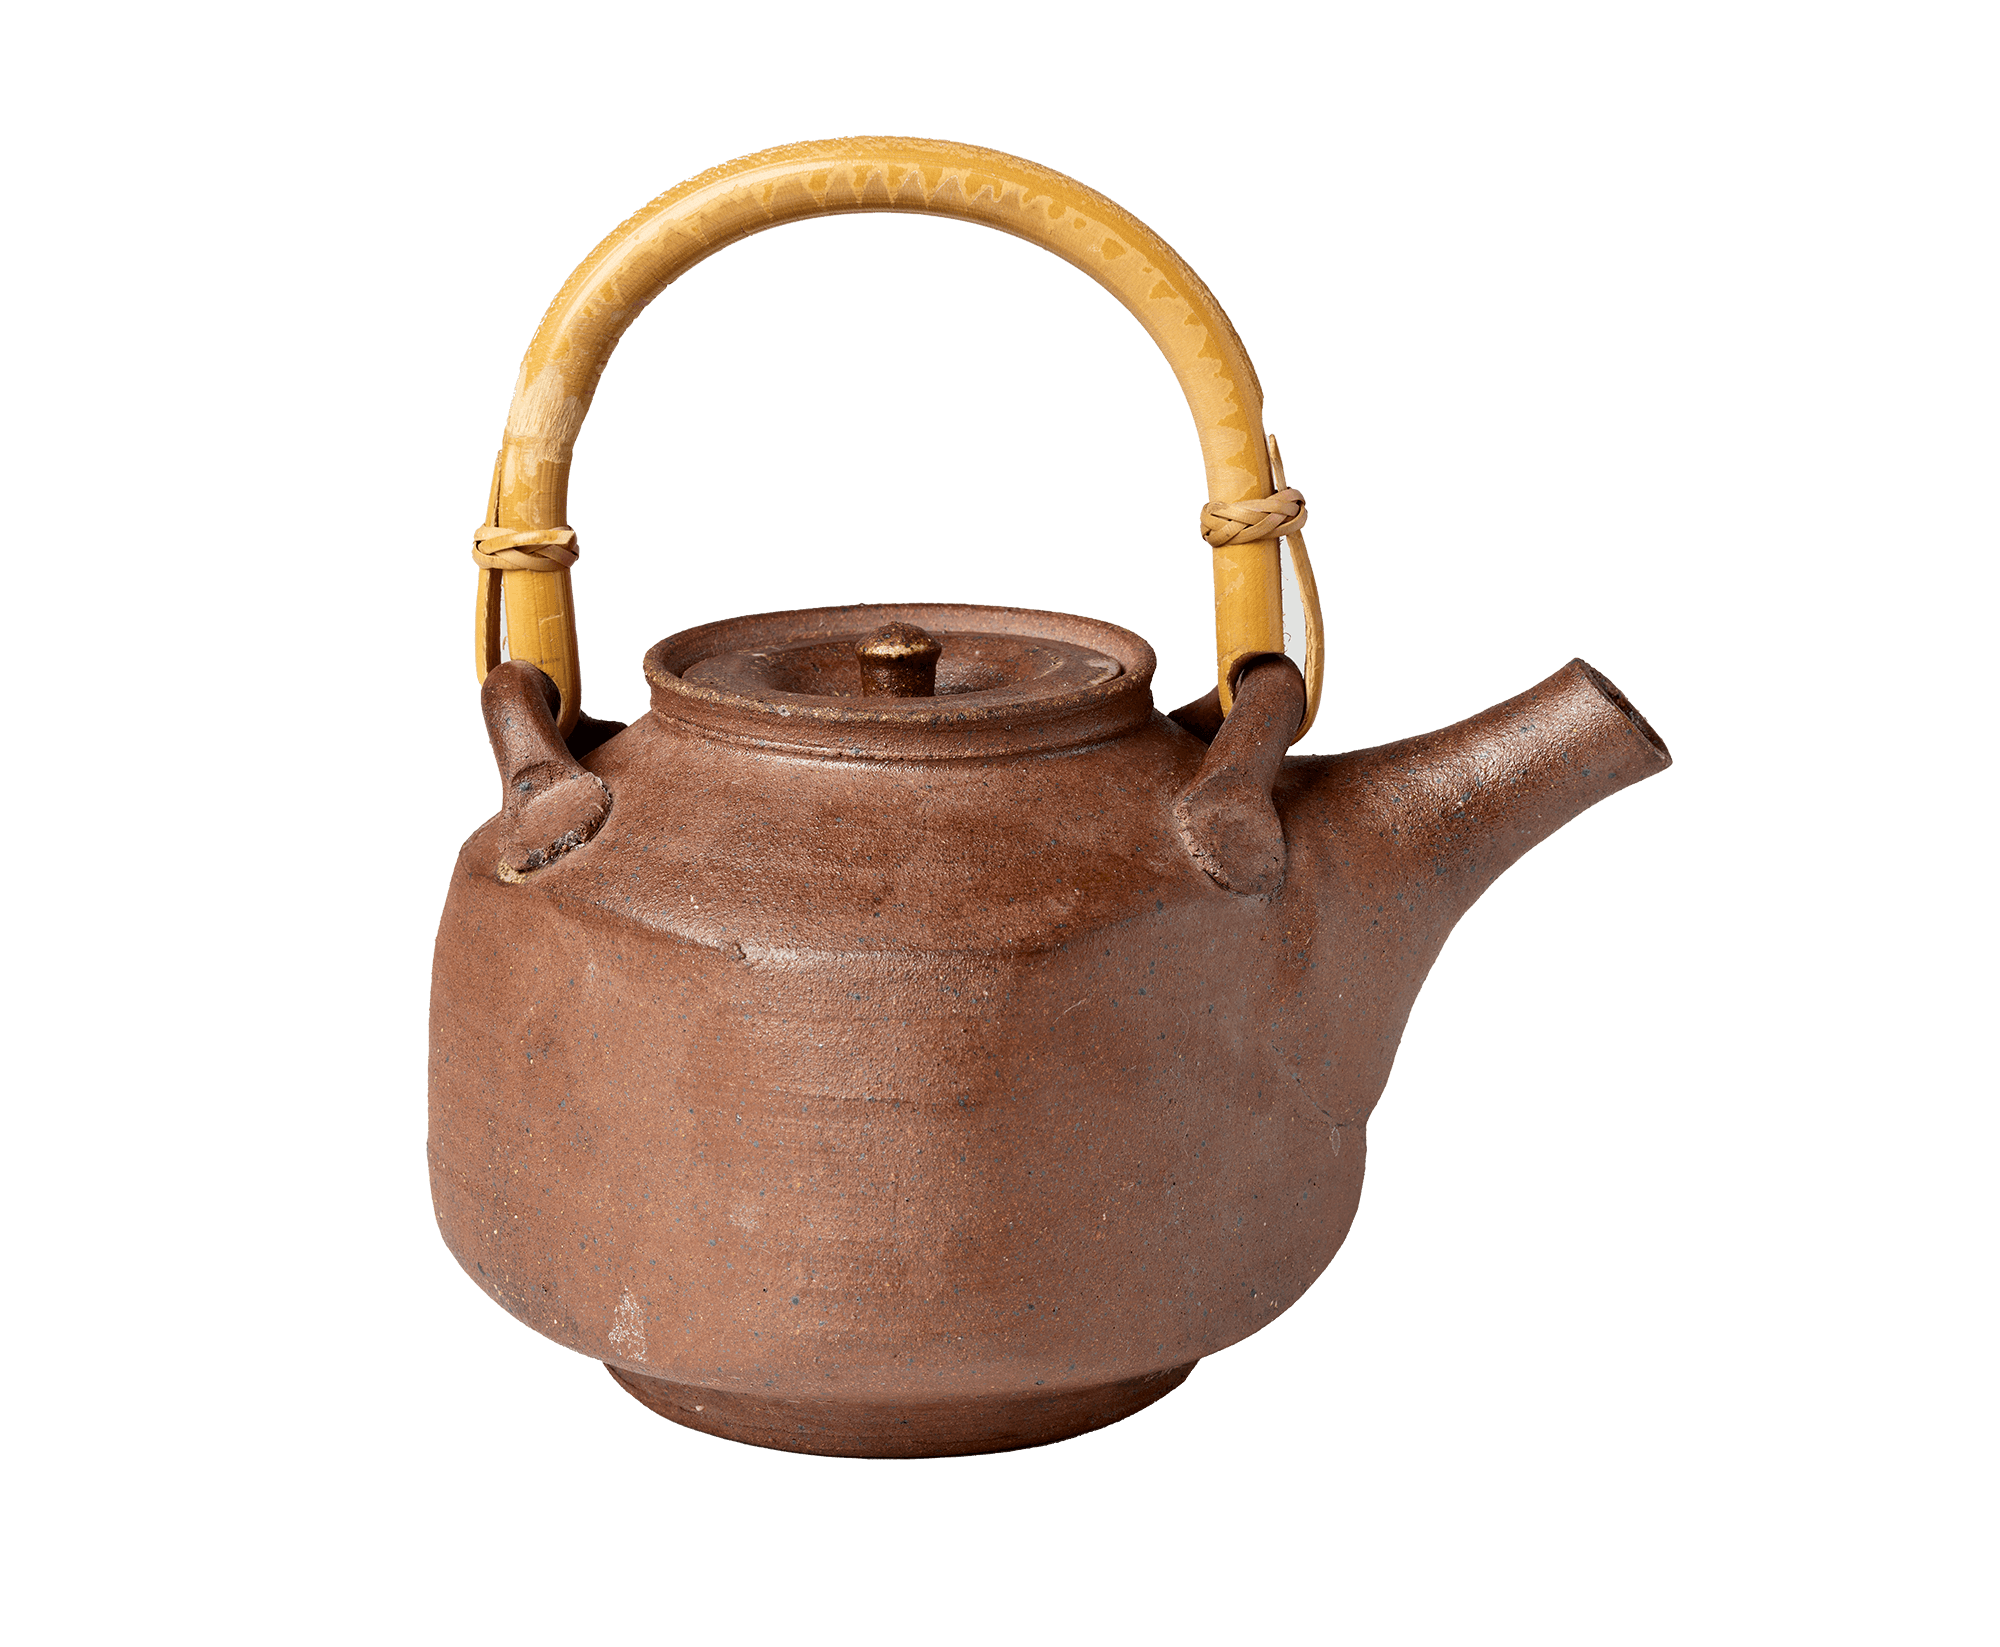 /Square-shaped%20brown%20teapot%20resting%20on%20circular%20foot.%20Rounded%20tan%20handle%20on%20top%20of%20teapot.